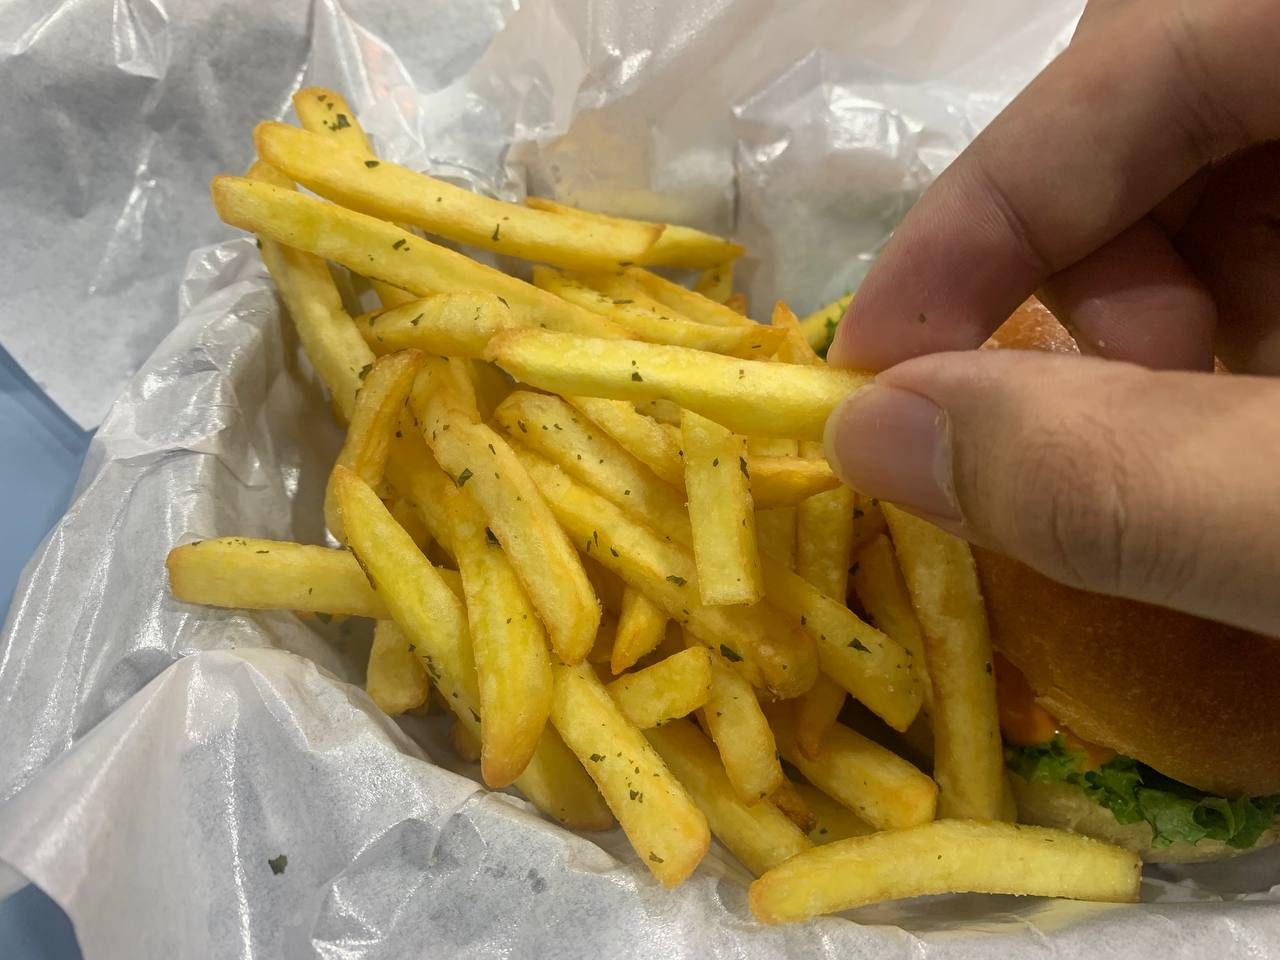 The Burger Coy - Normal French Fries